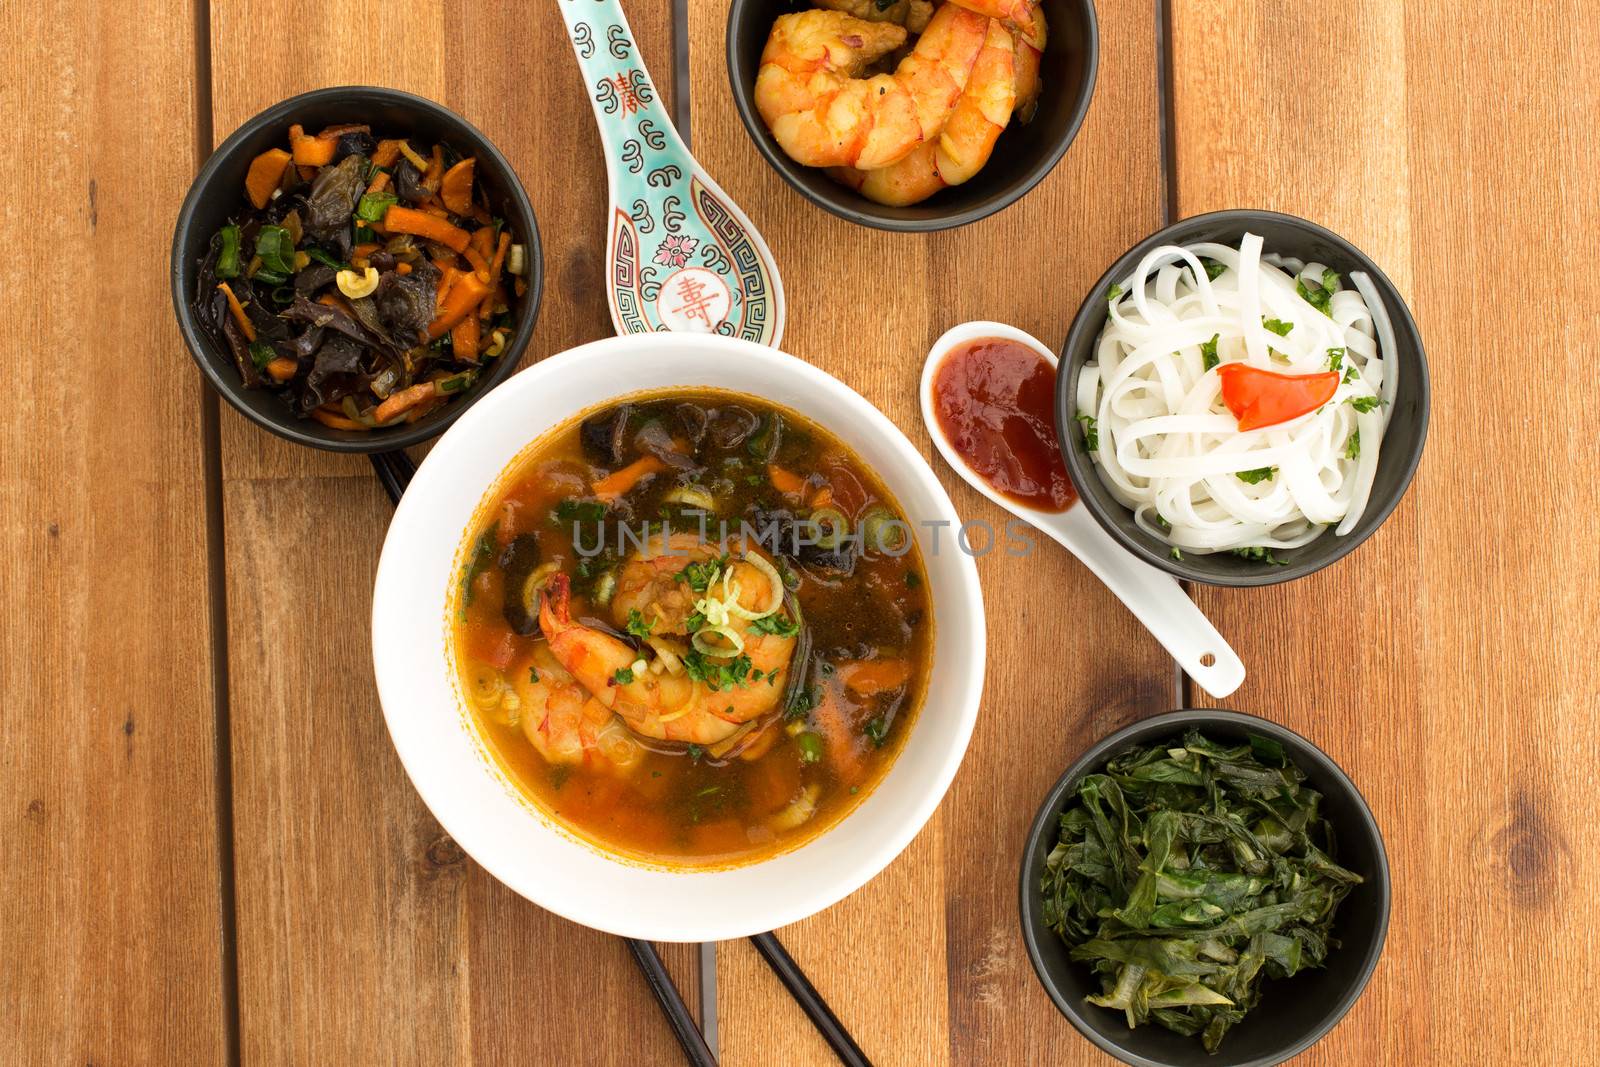 Asian vegetarian composition of food composed with four bowls of different appetizers (rice noodles, kale, fried vegetables and shrimps) and two ceramic spoons with asian sauce. Composition on a old styled wooden table.